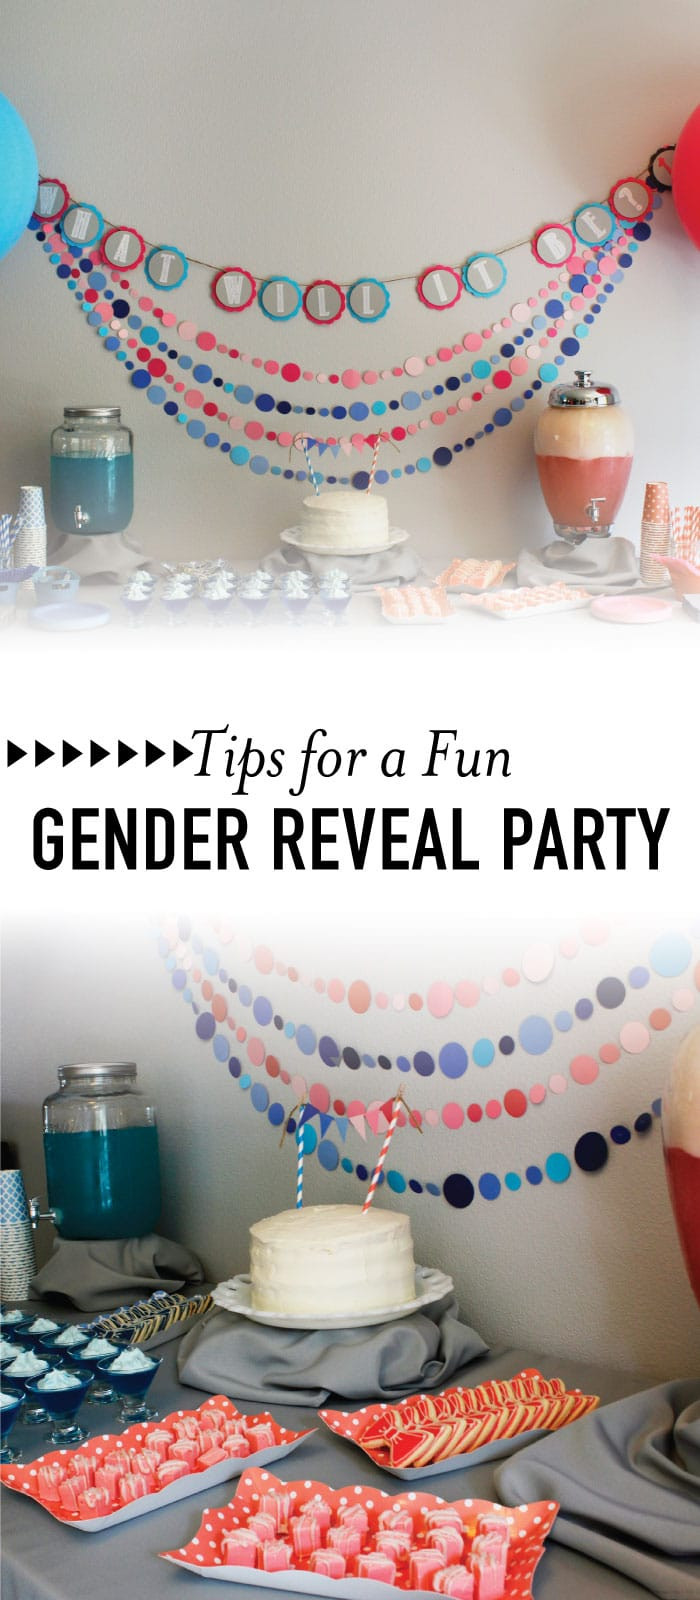 Gender Reveal Party Decoration Ideas
 Tips for a DIY Gender Reveal Party